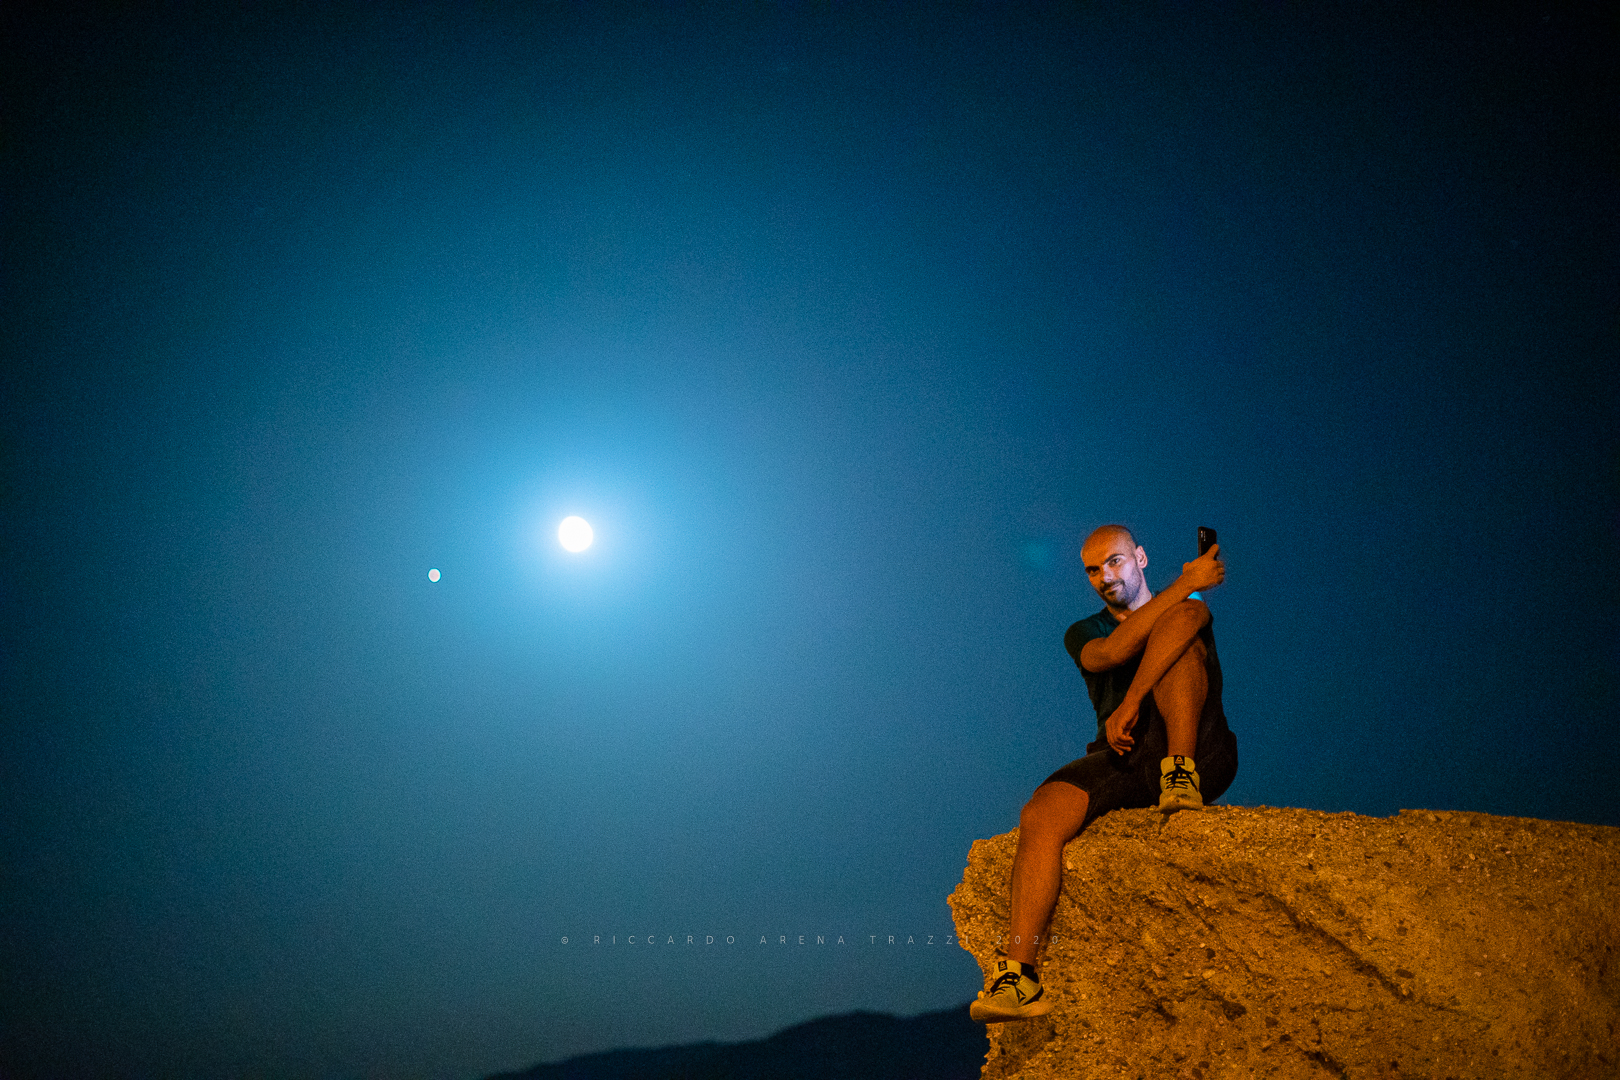 A simple selfie with Moon and Mars...